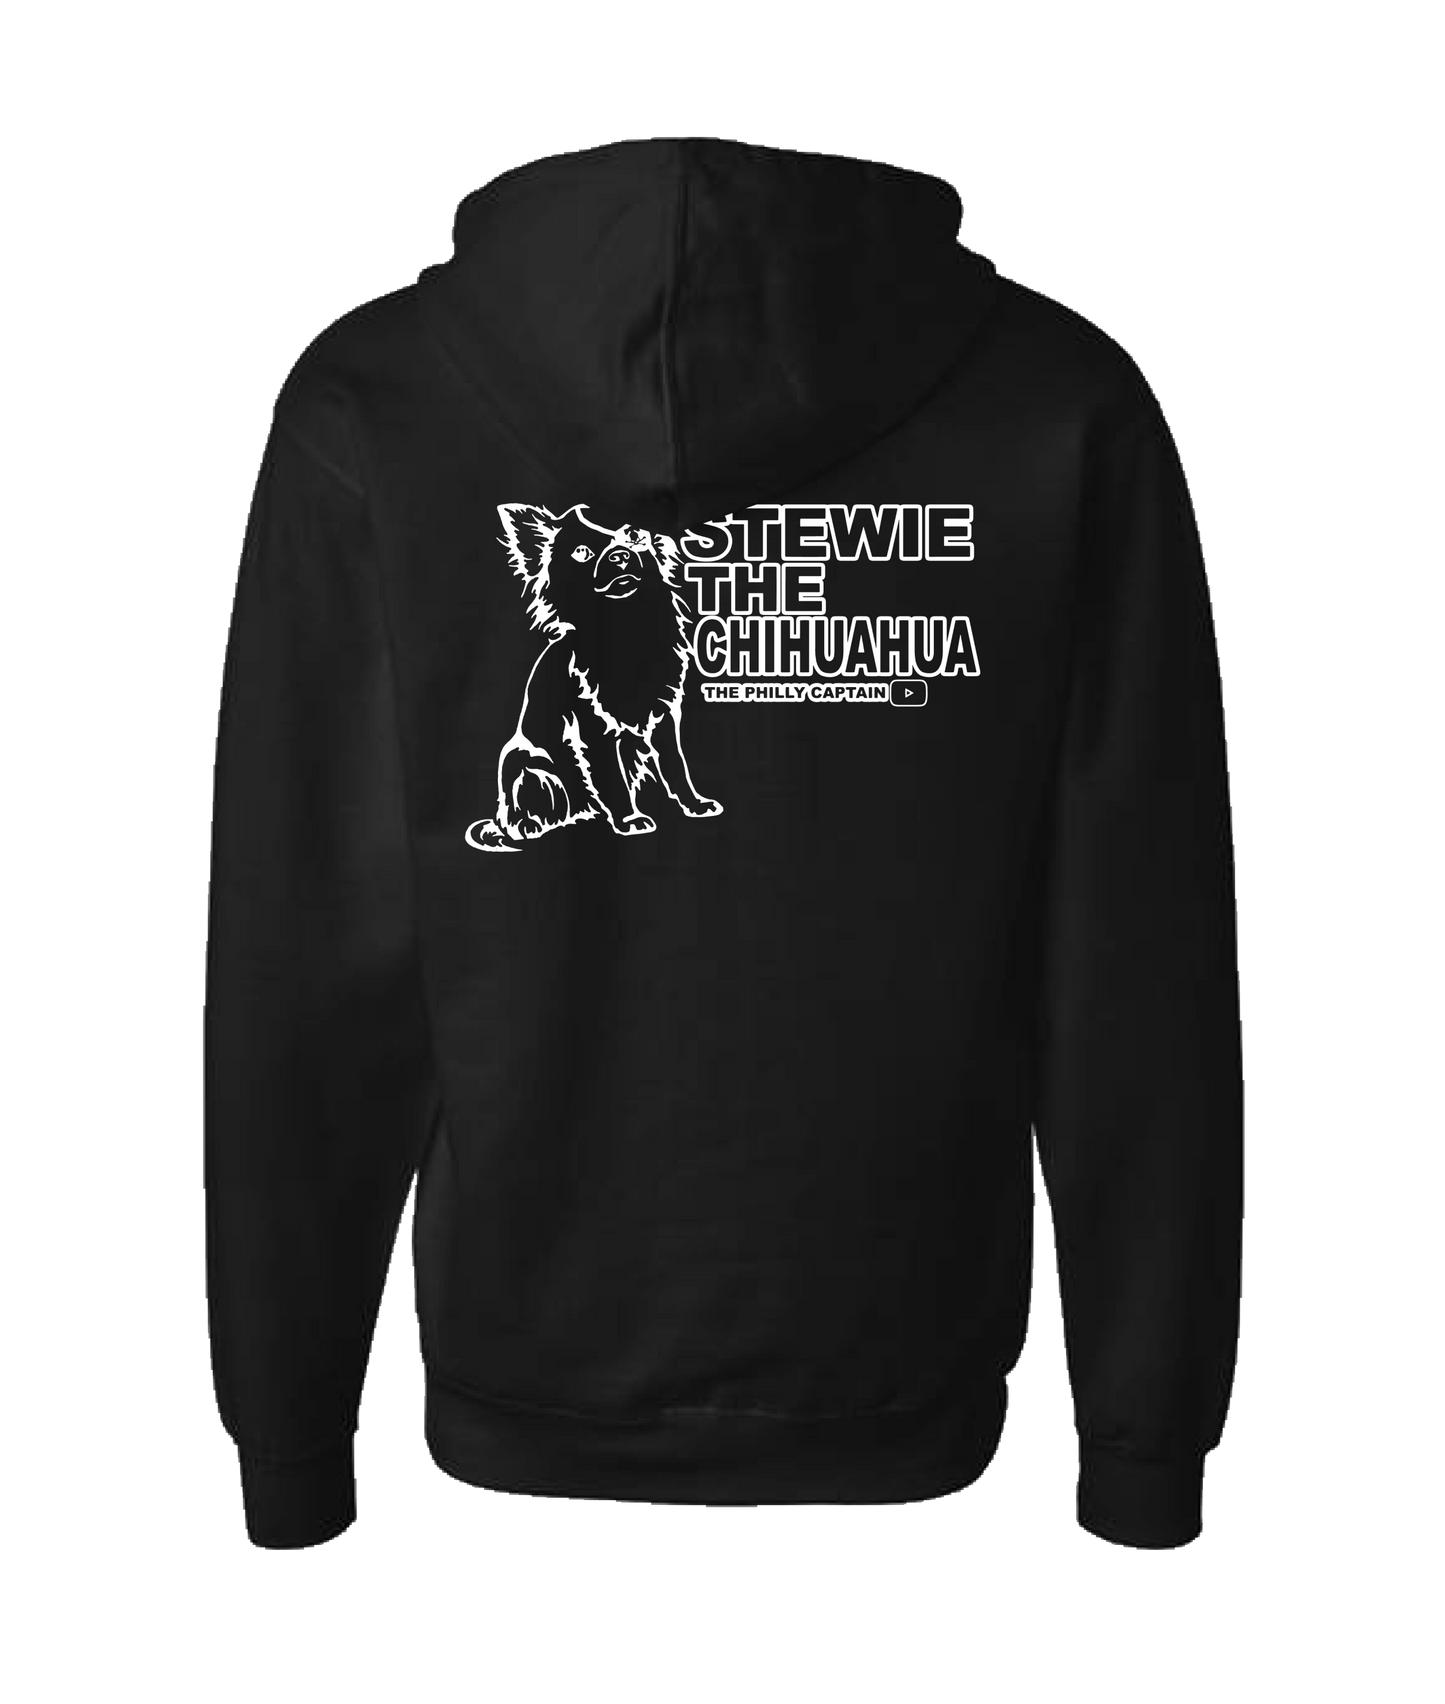 The Philly Captain's Merch is Fire - Stewie the Chihuahua - Black Zip Up Hoodie